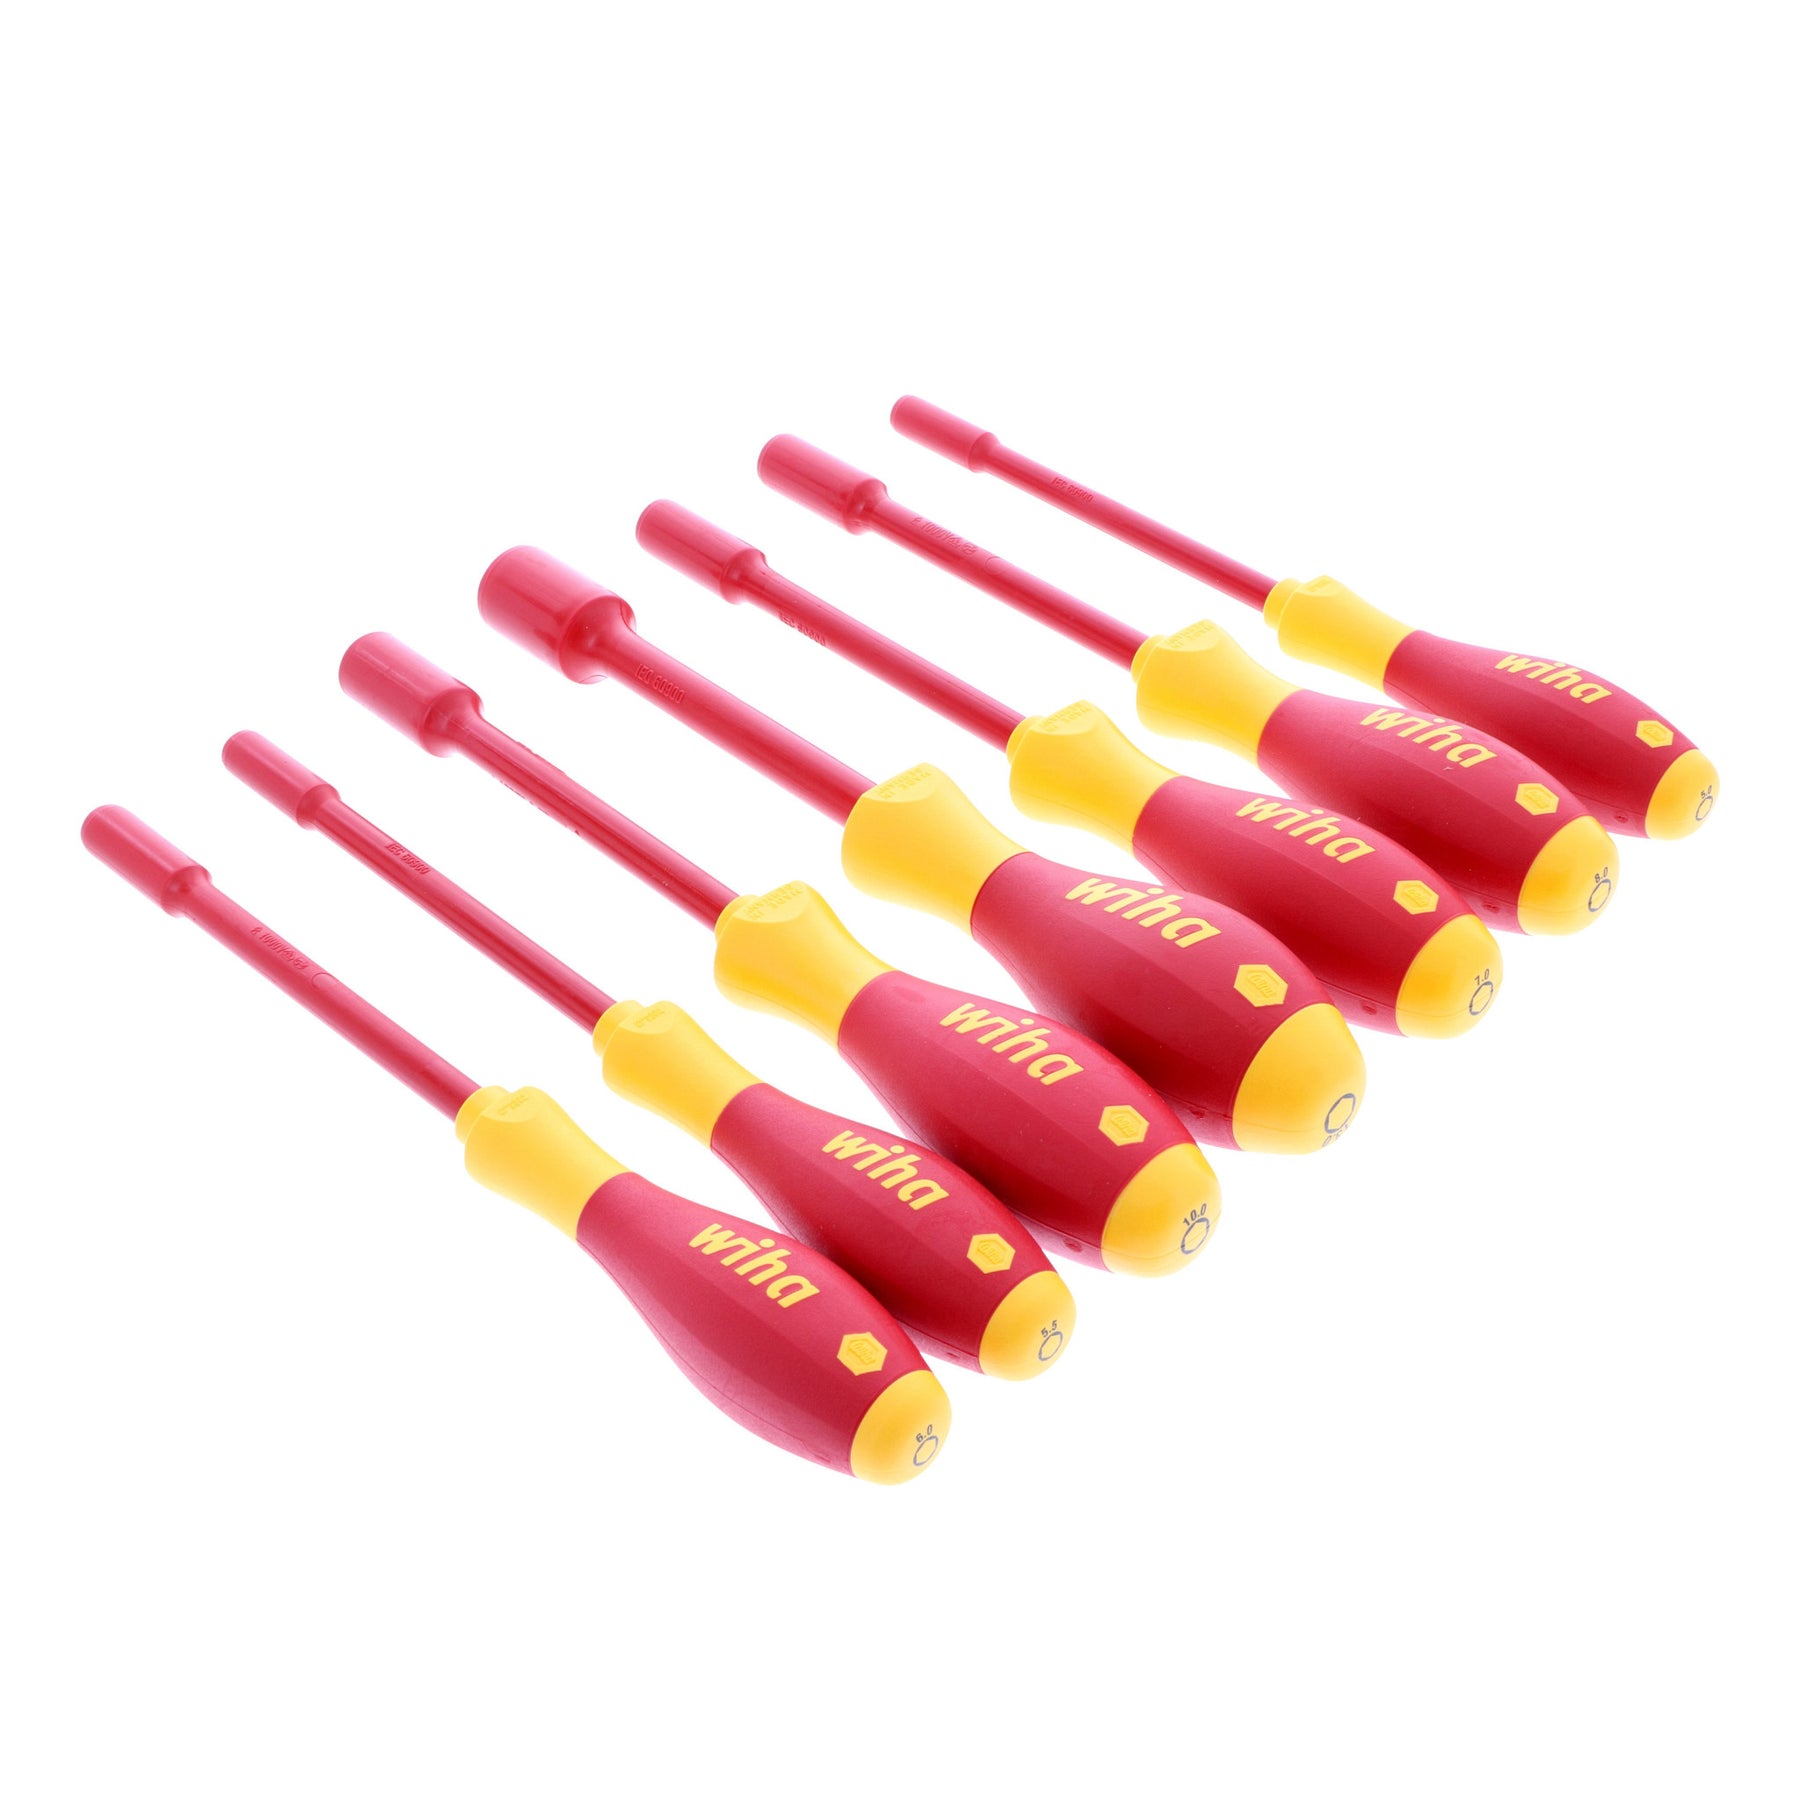 7 Piece Insulated SoftFinish Nut Driver Set - Metric